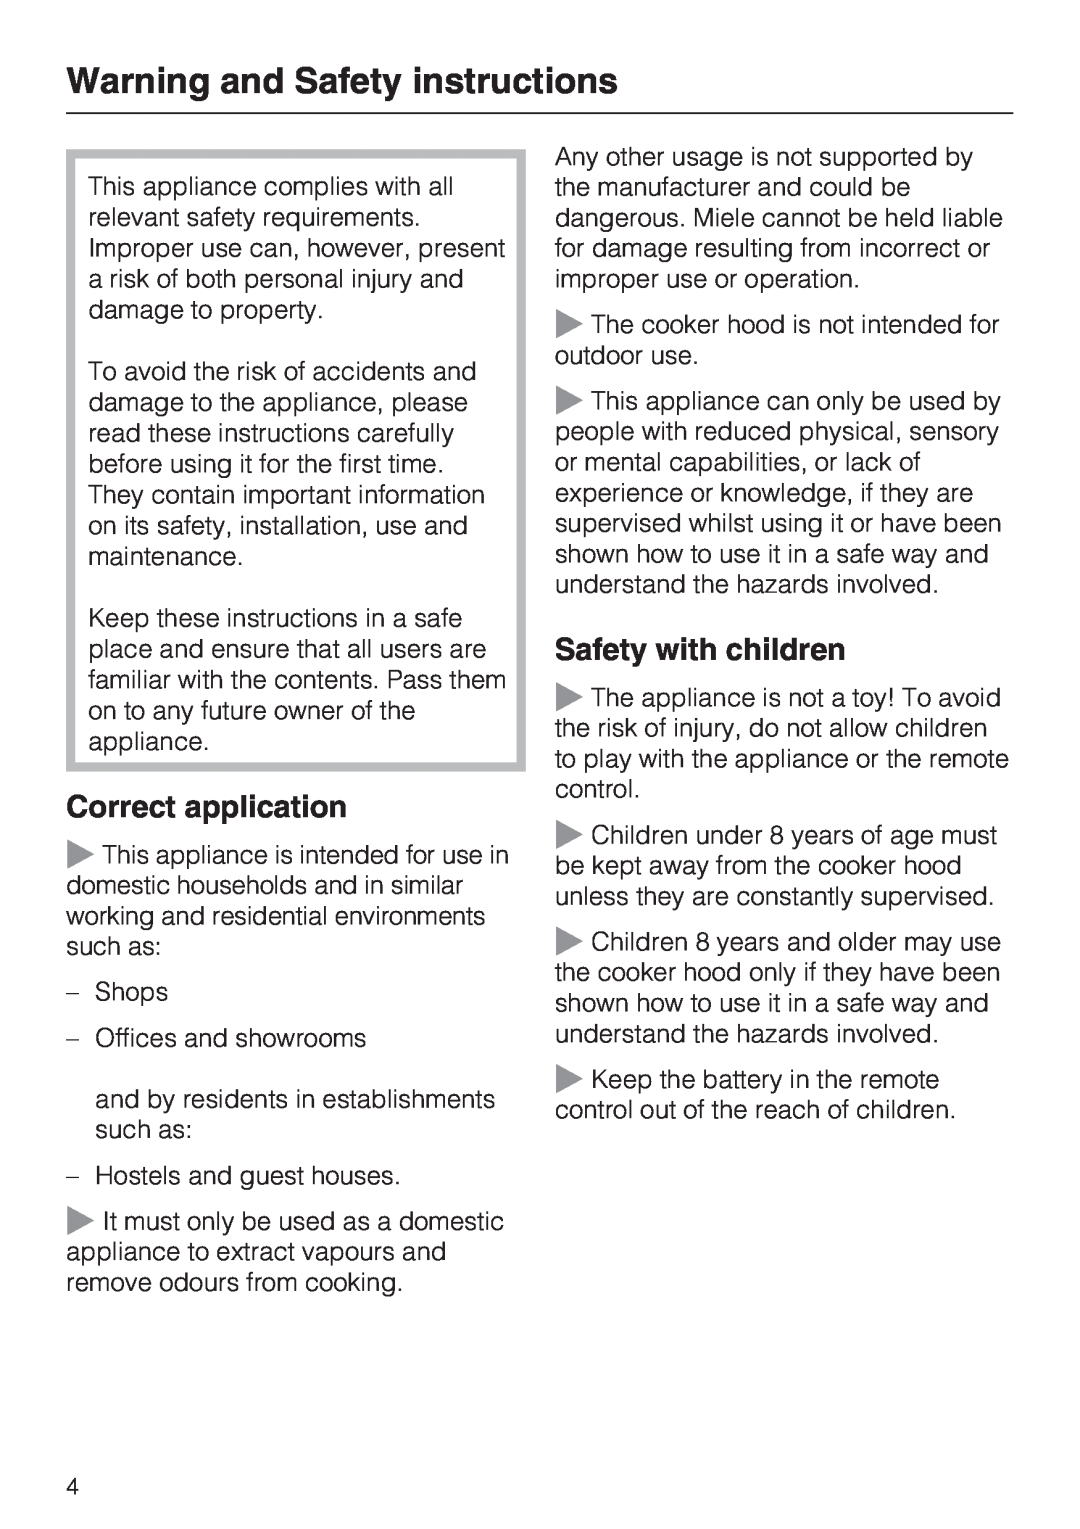 Miele DA2900EXT installation instructions Warning and Safety instructions, Correct application, Safety with children 